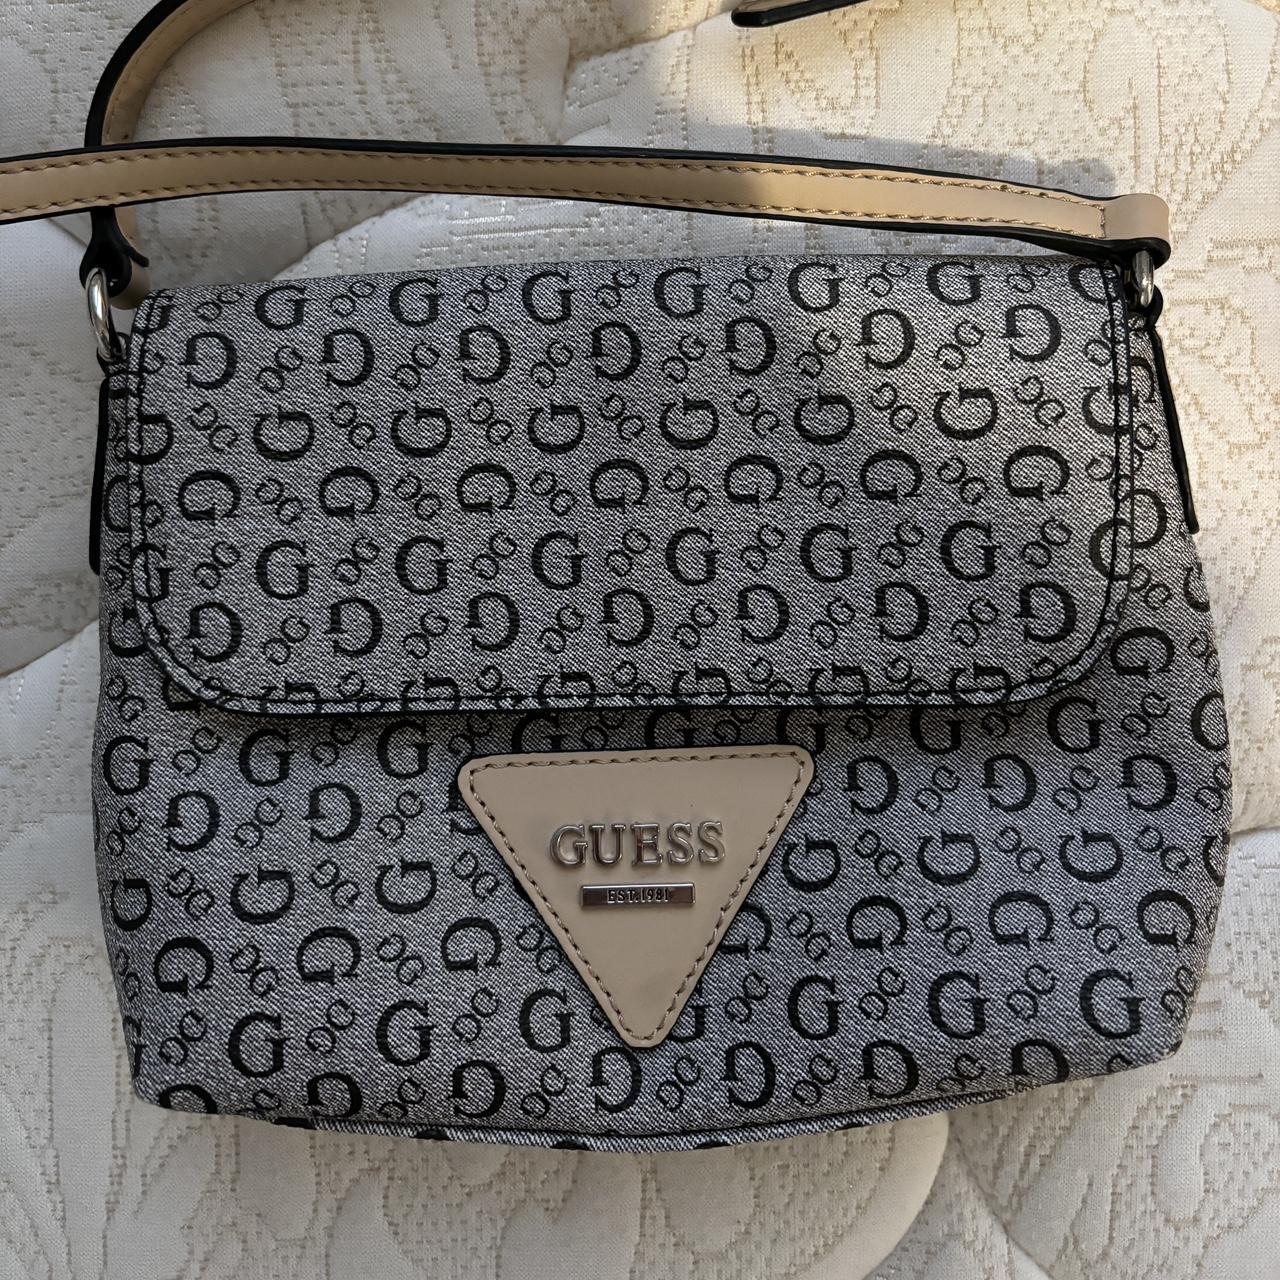 Help me find the name of this vintage Guess bag please! : r/findfashion